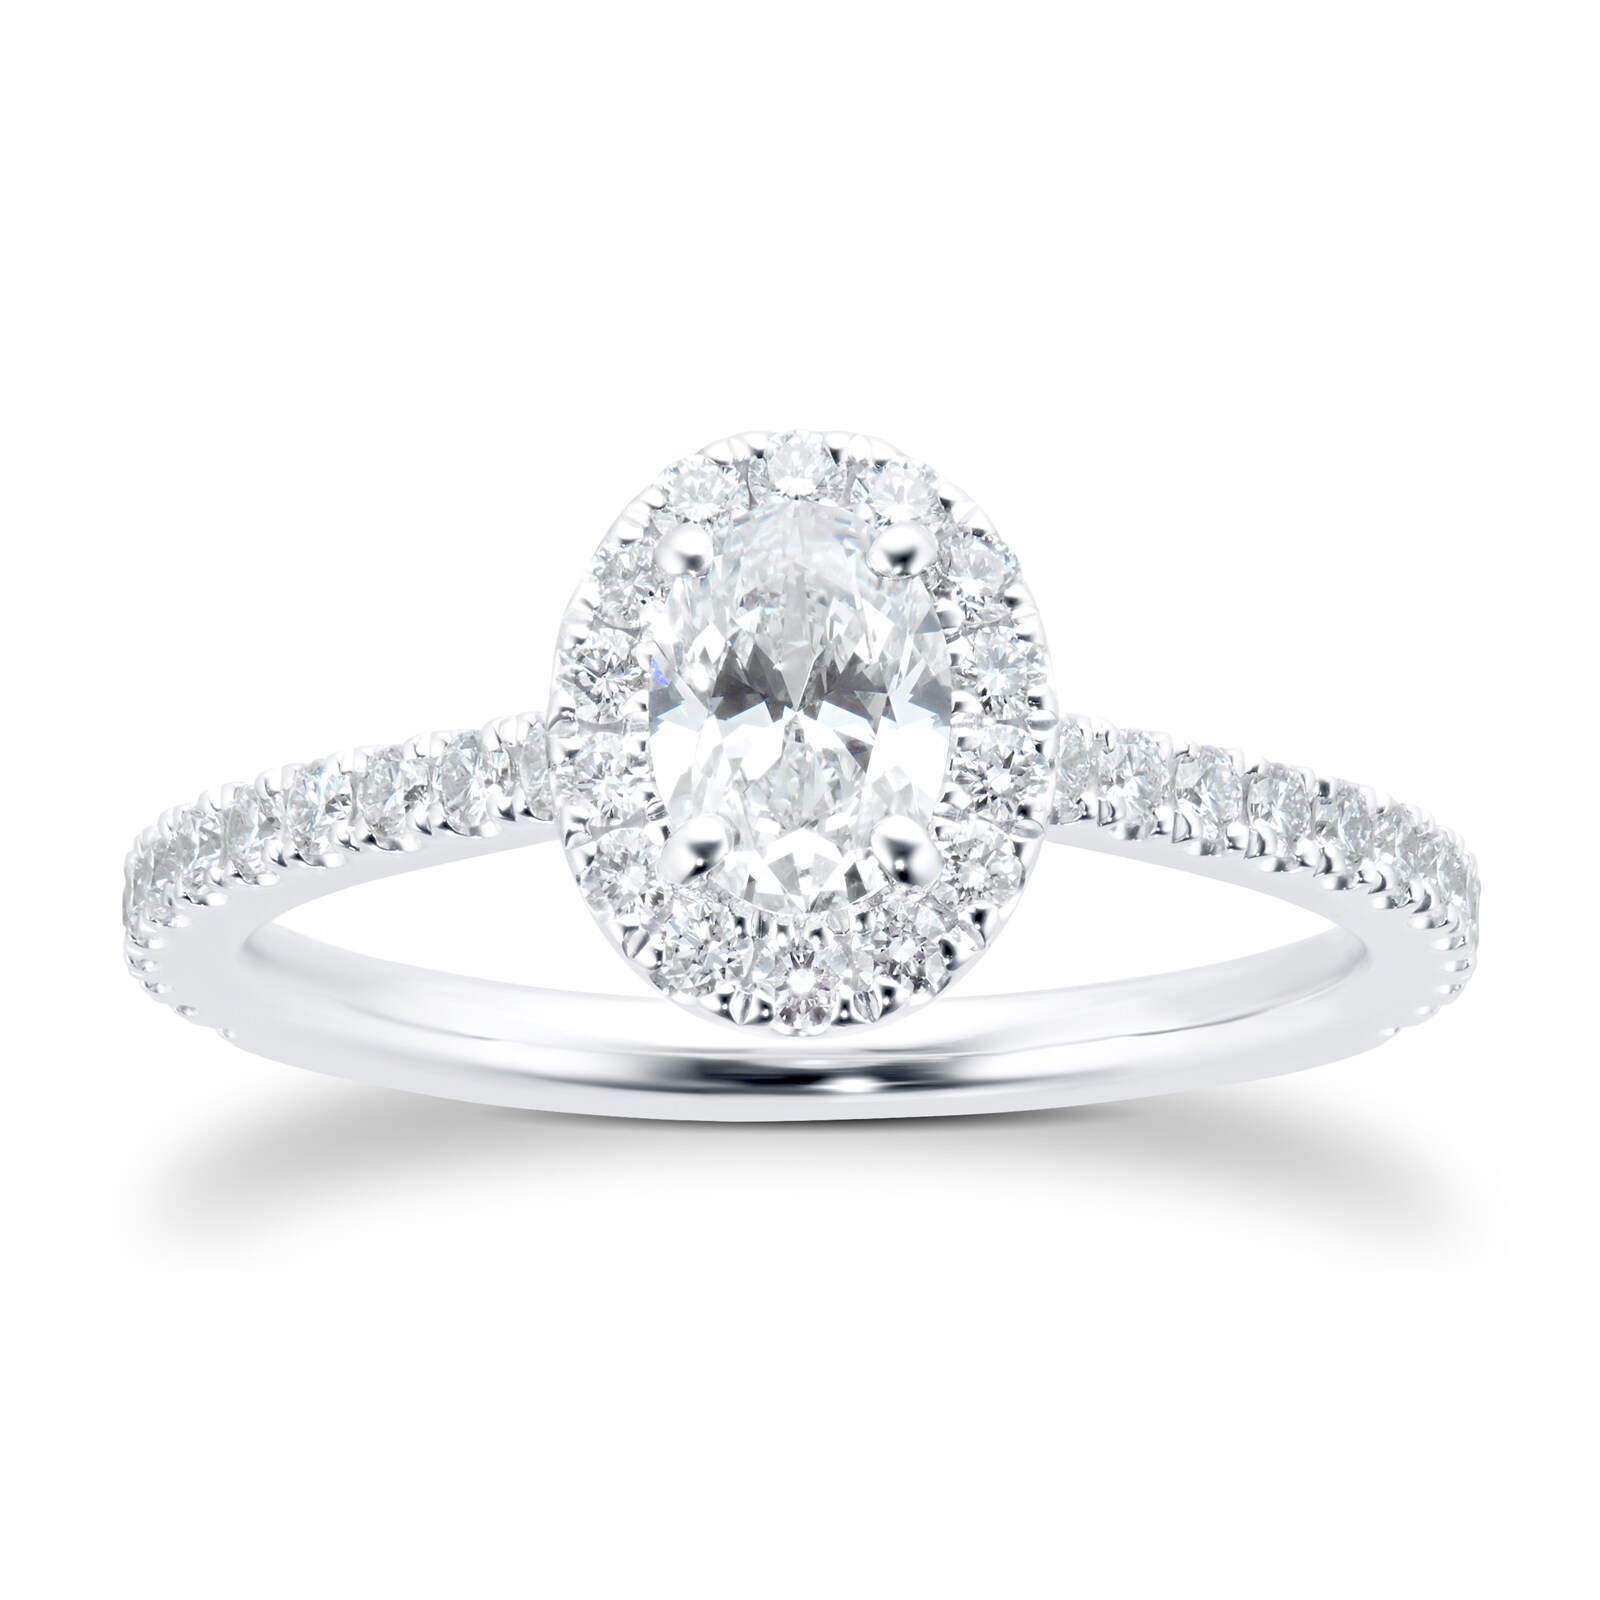 Halo Engagement Rings - Halo Rings - Ethically Sourced